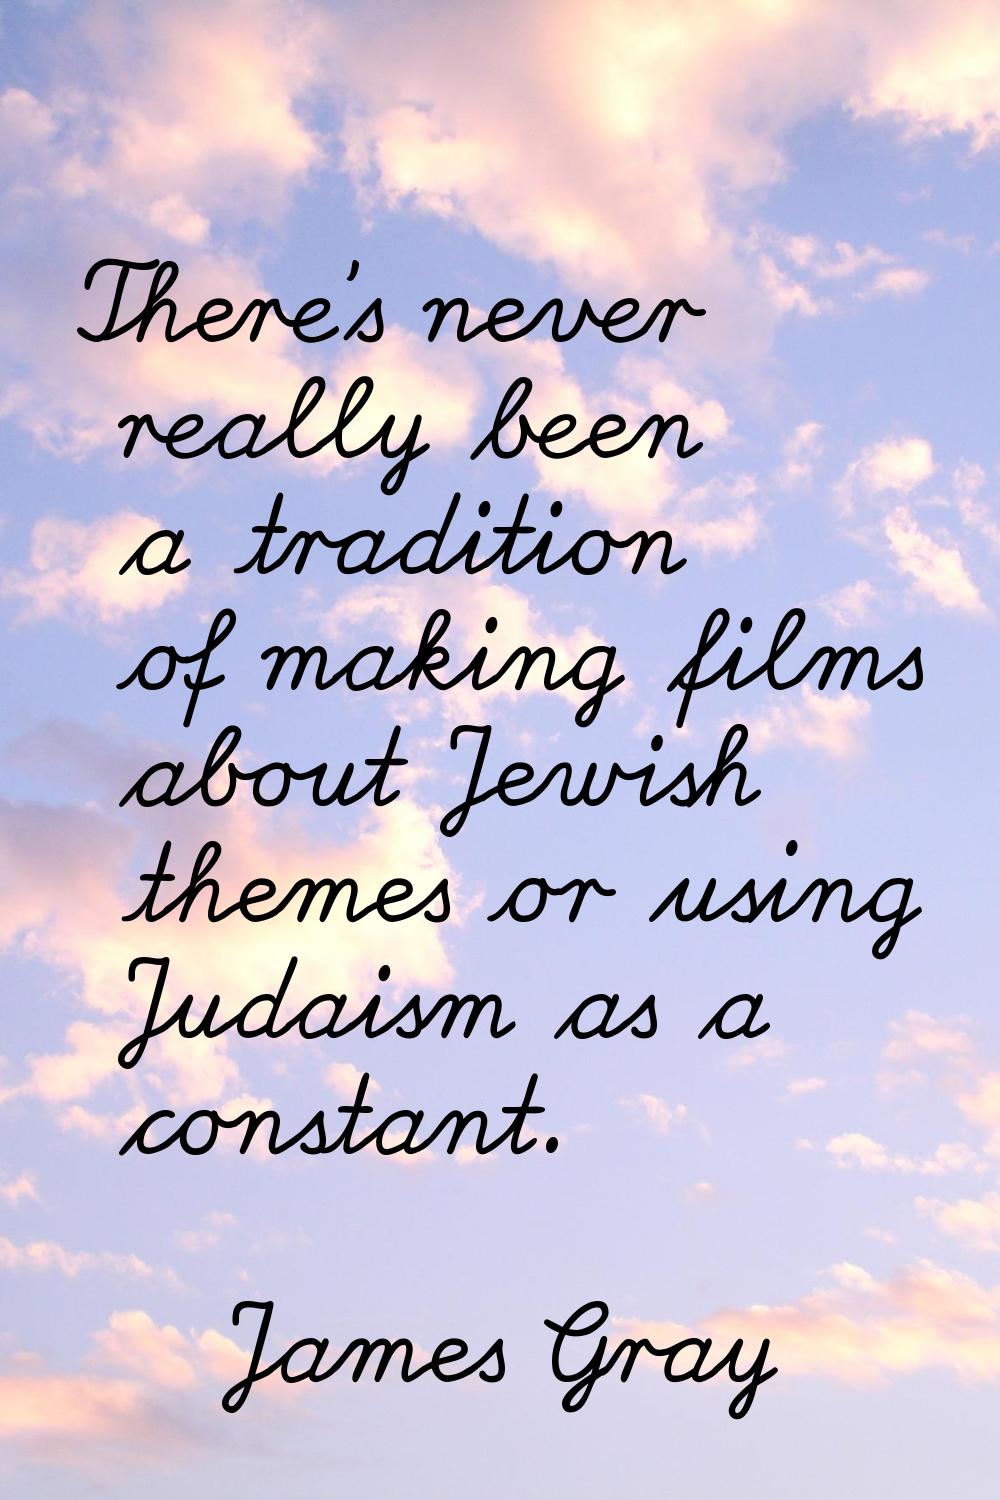 There's never really been a tradition of making films about Jewish themes or using Judaism as a con